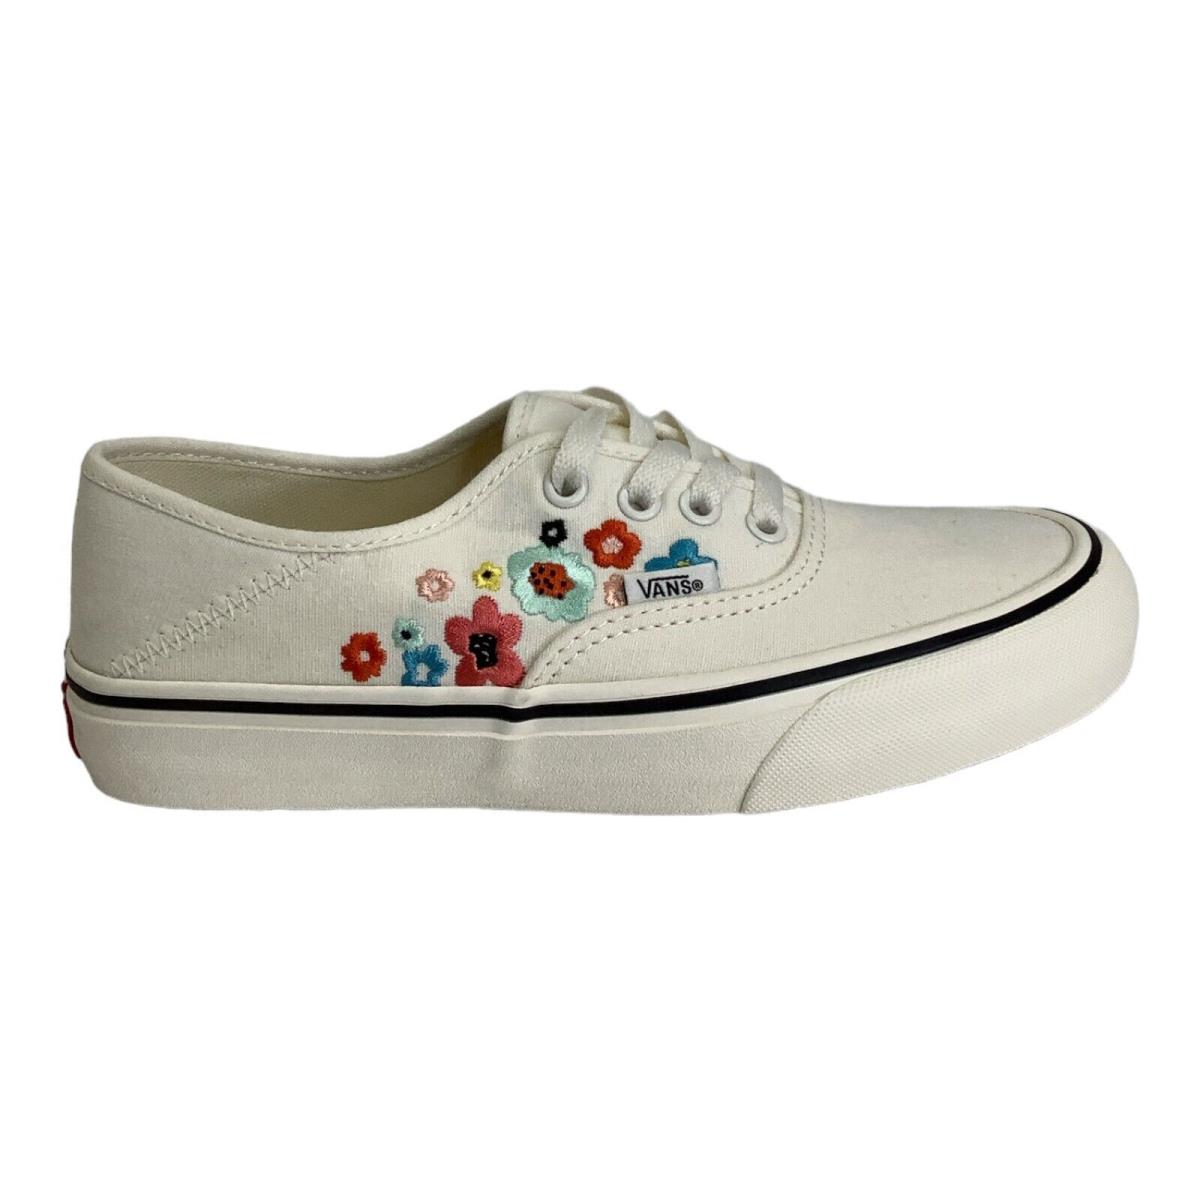 Vans Authentic Vr3 Vr3 Skating Groovy Floral Marshmallow M 10 W 11.5 EU 43